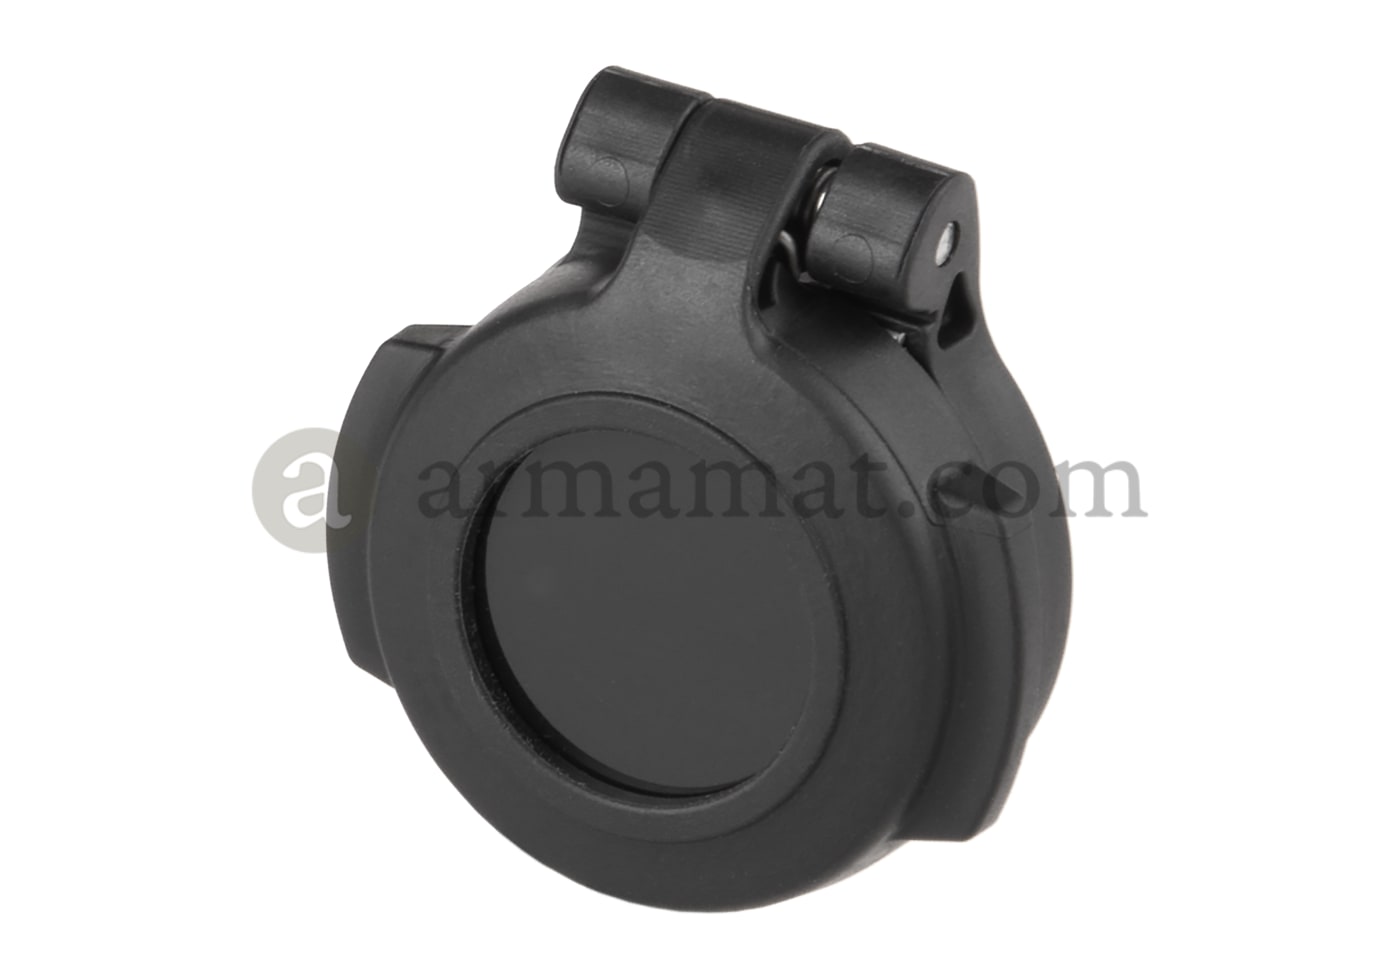 Aimpoint Flip Up Rear Cover Micro 2024 Armamat 4321